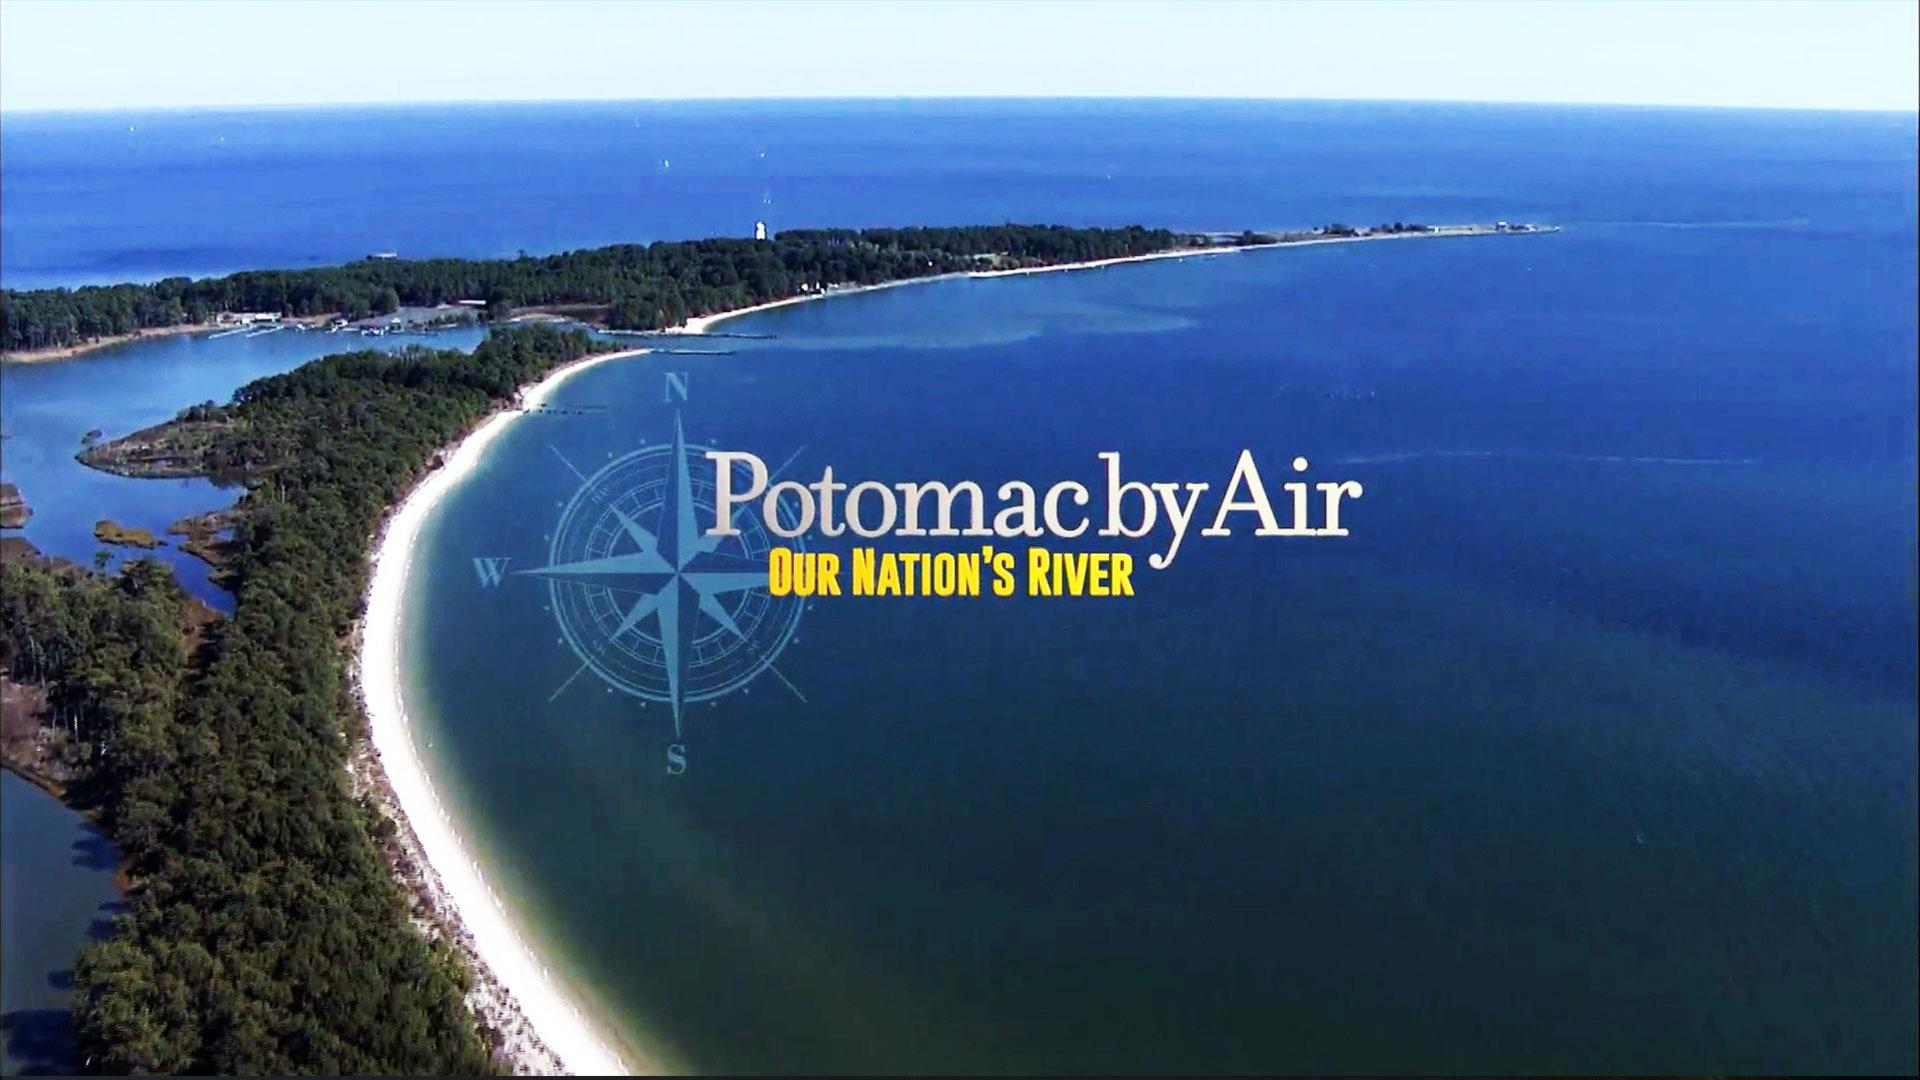 Potomac by Air: Our Nation's River